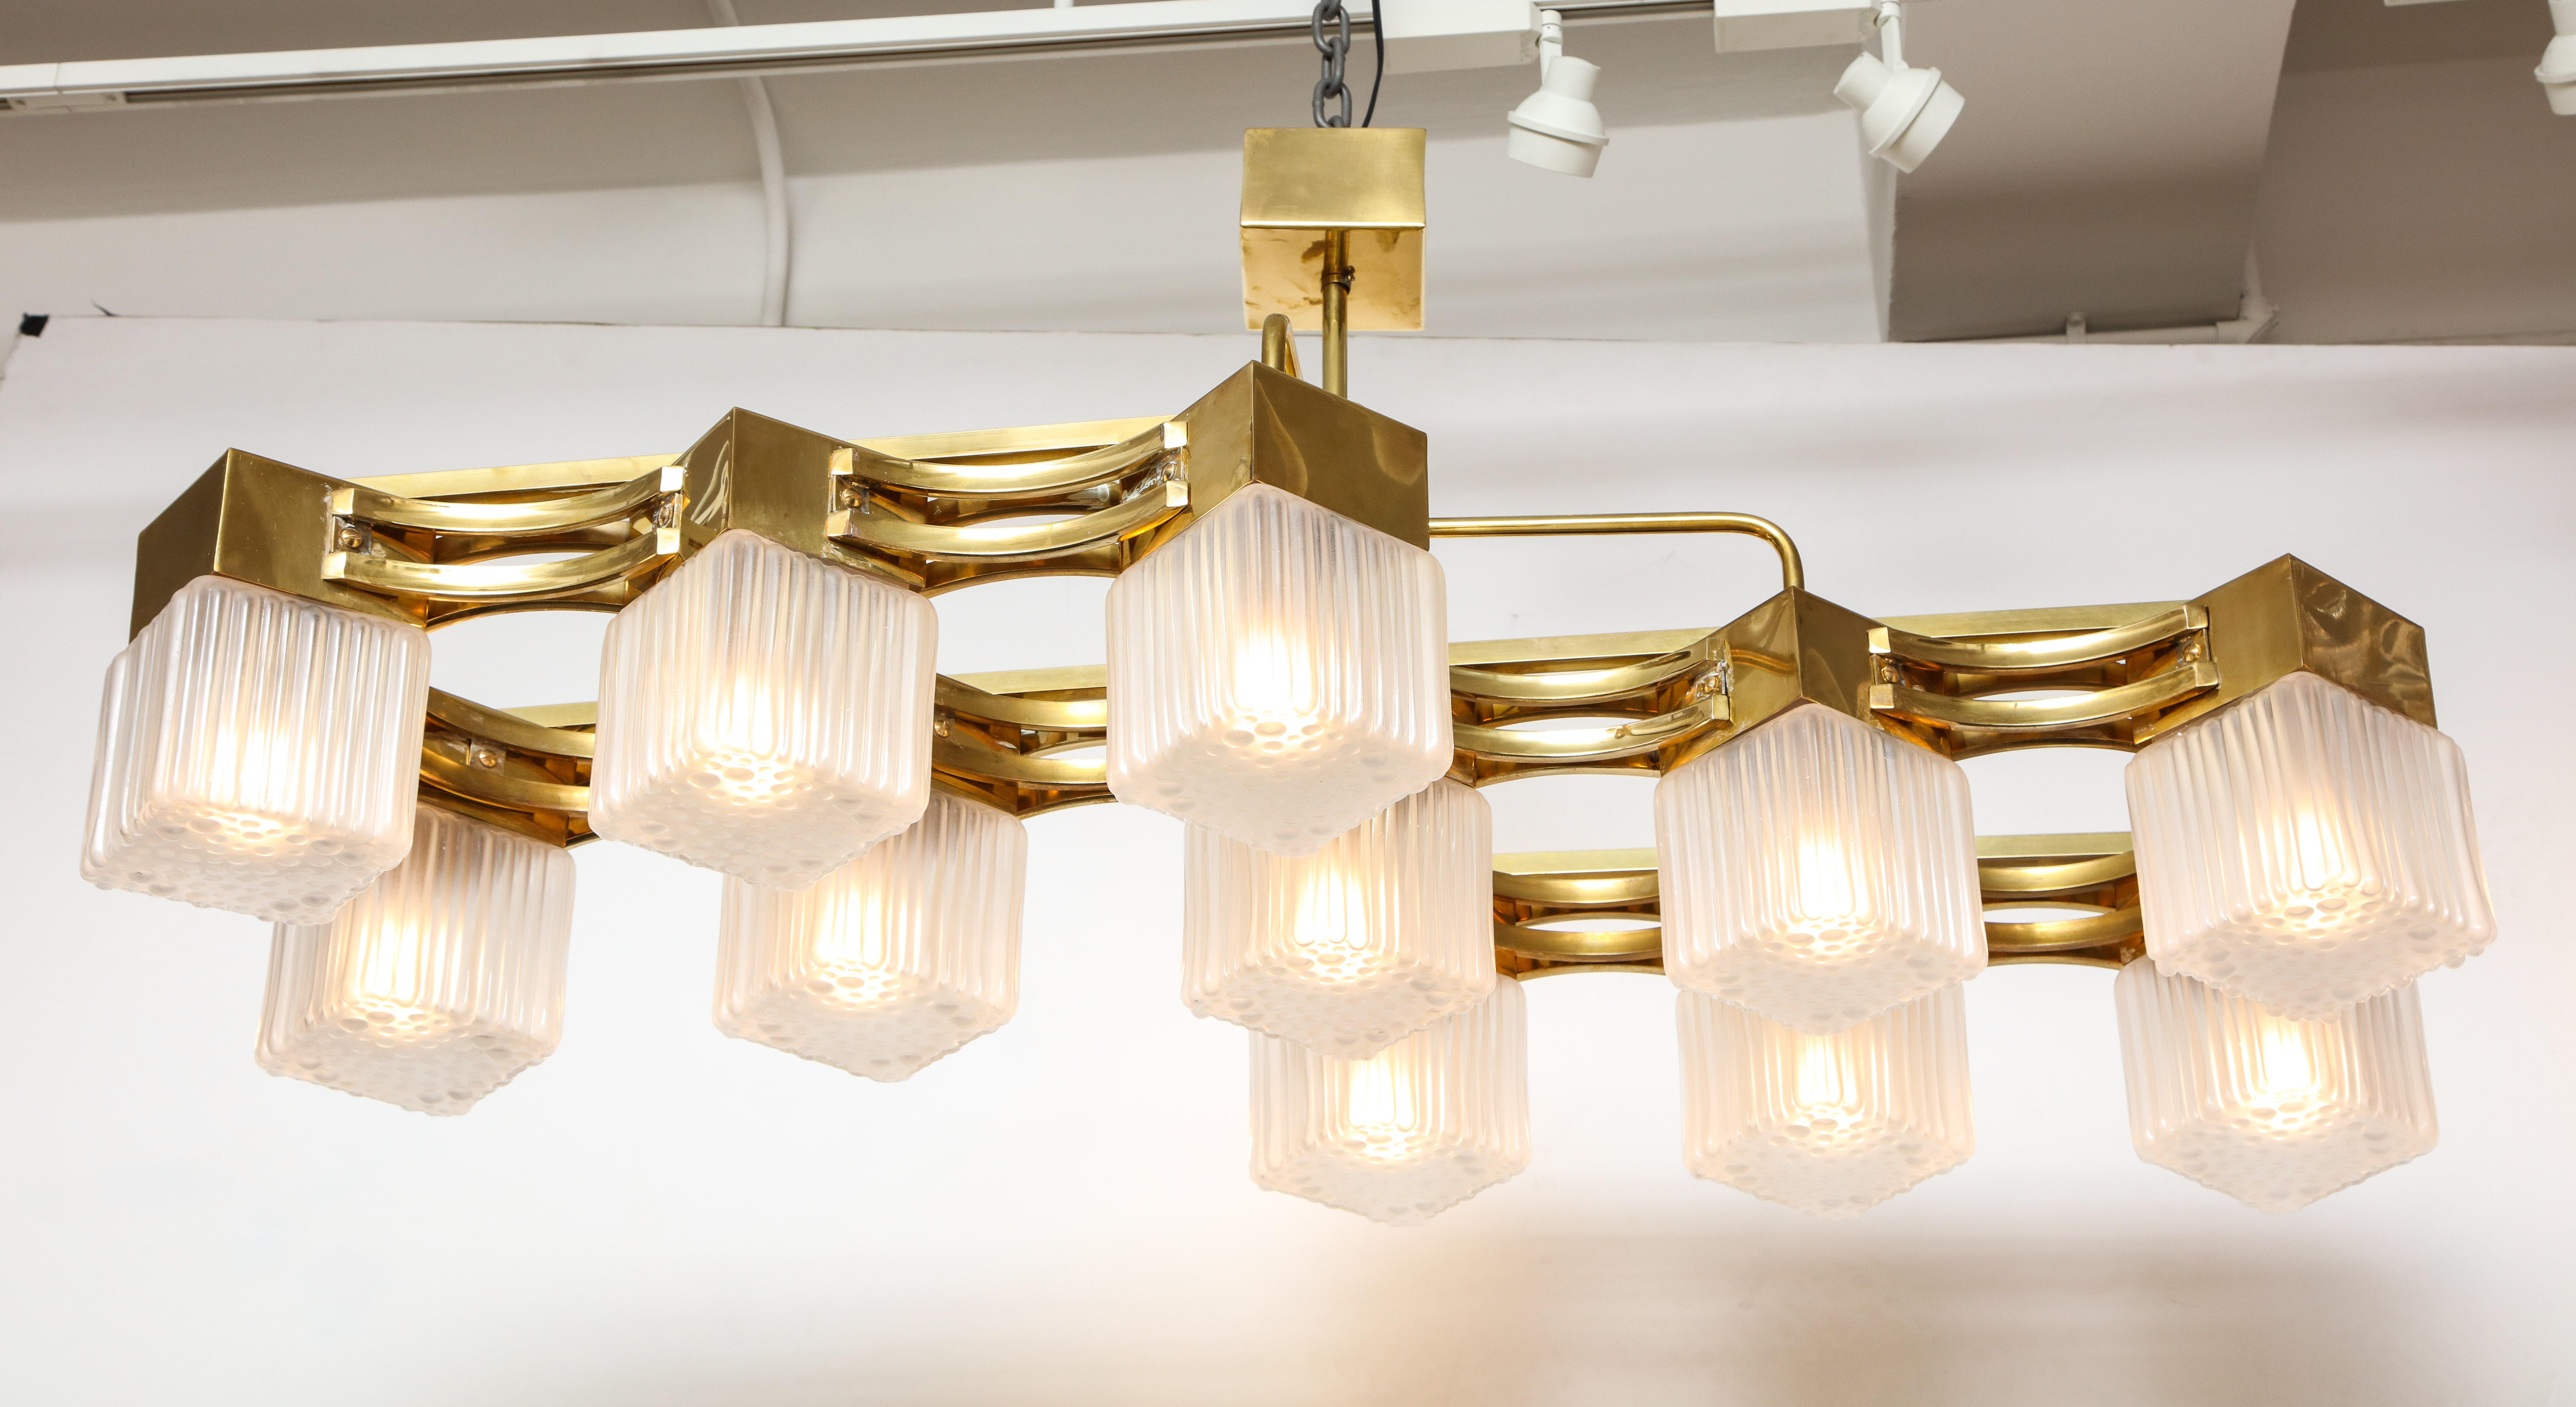 This Italian chandelier is the epitome of mid-century chic. Linear brass 11-arm frame features square, ridged, hand casted translucent white glass shades. Newly wired for U.S. standards. 

This chandelier is on display at the 1stdibs Gallery at